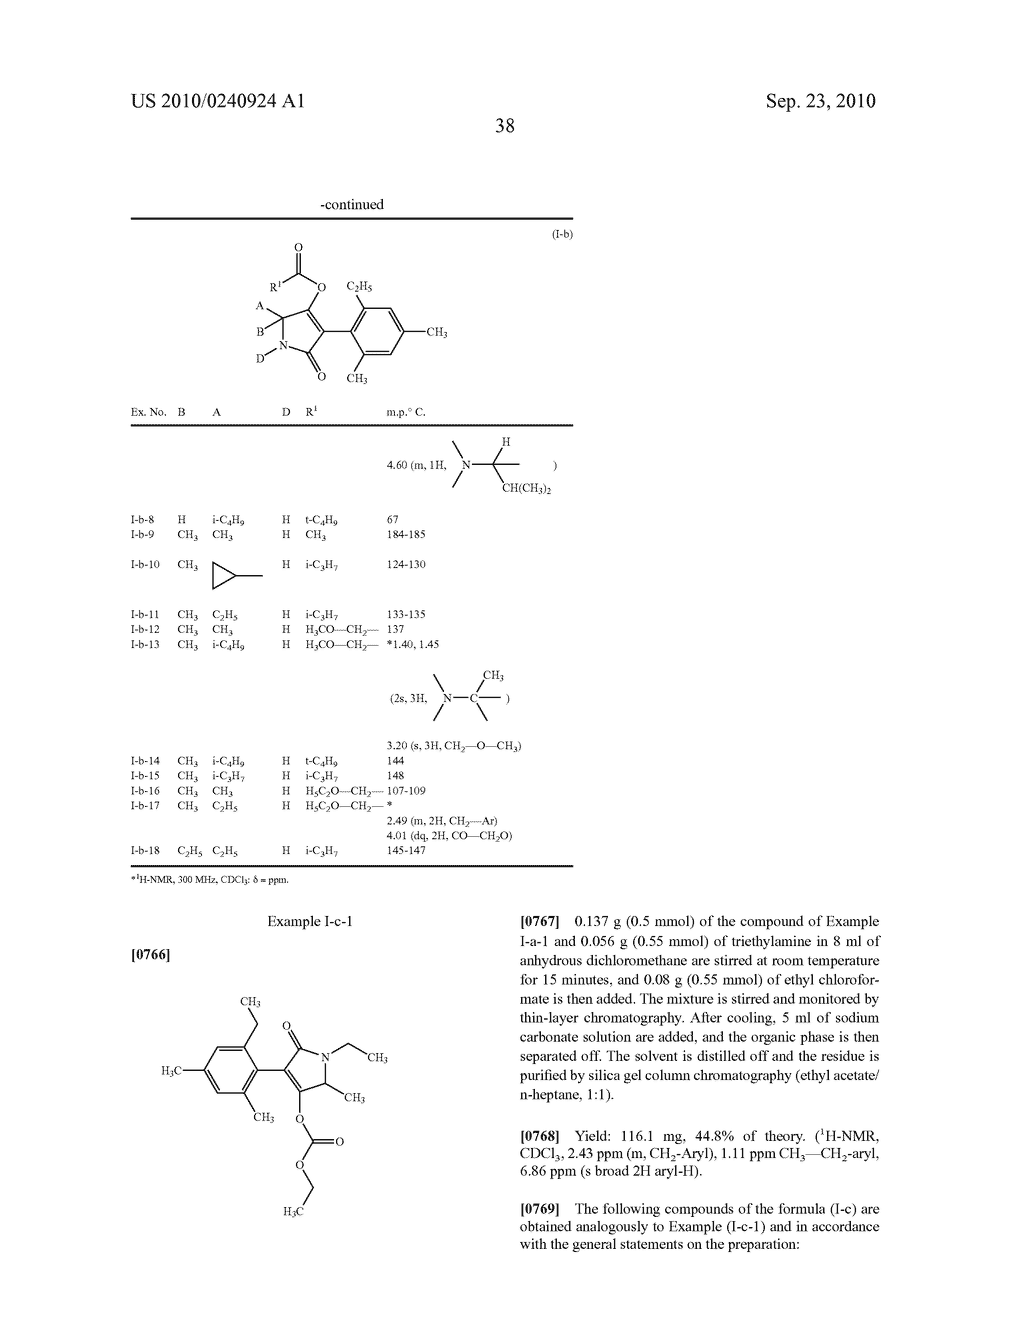 2-ETHYL-4,6-DIMETHYL-PHENYL-SUBSTITUTED TETRAMIC ACID DERIVATIVES AS PEST CONTROL AGENTS AND/OR HERBICIDES - diagram, schematic, and image 39